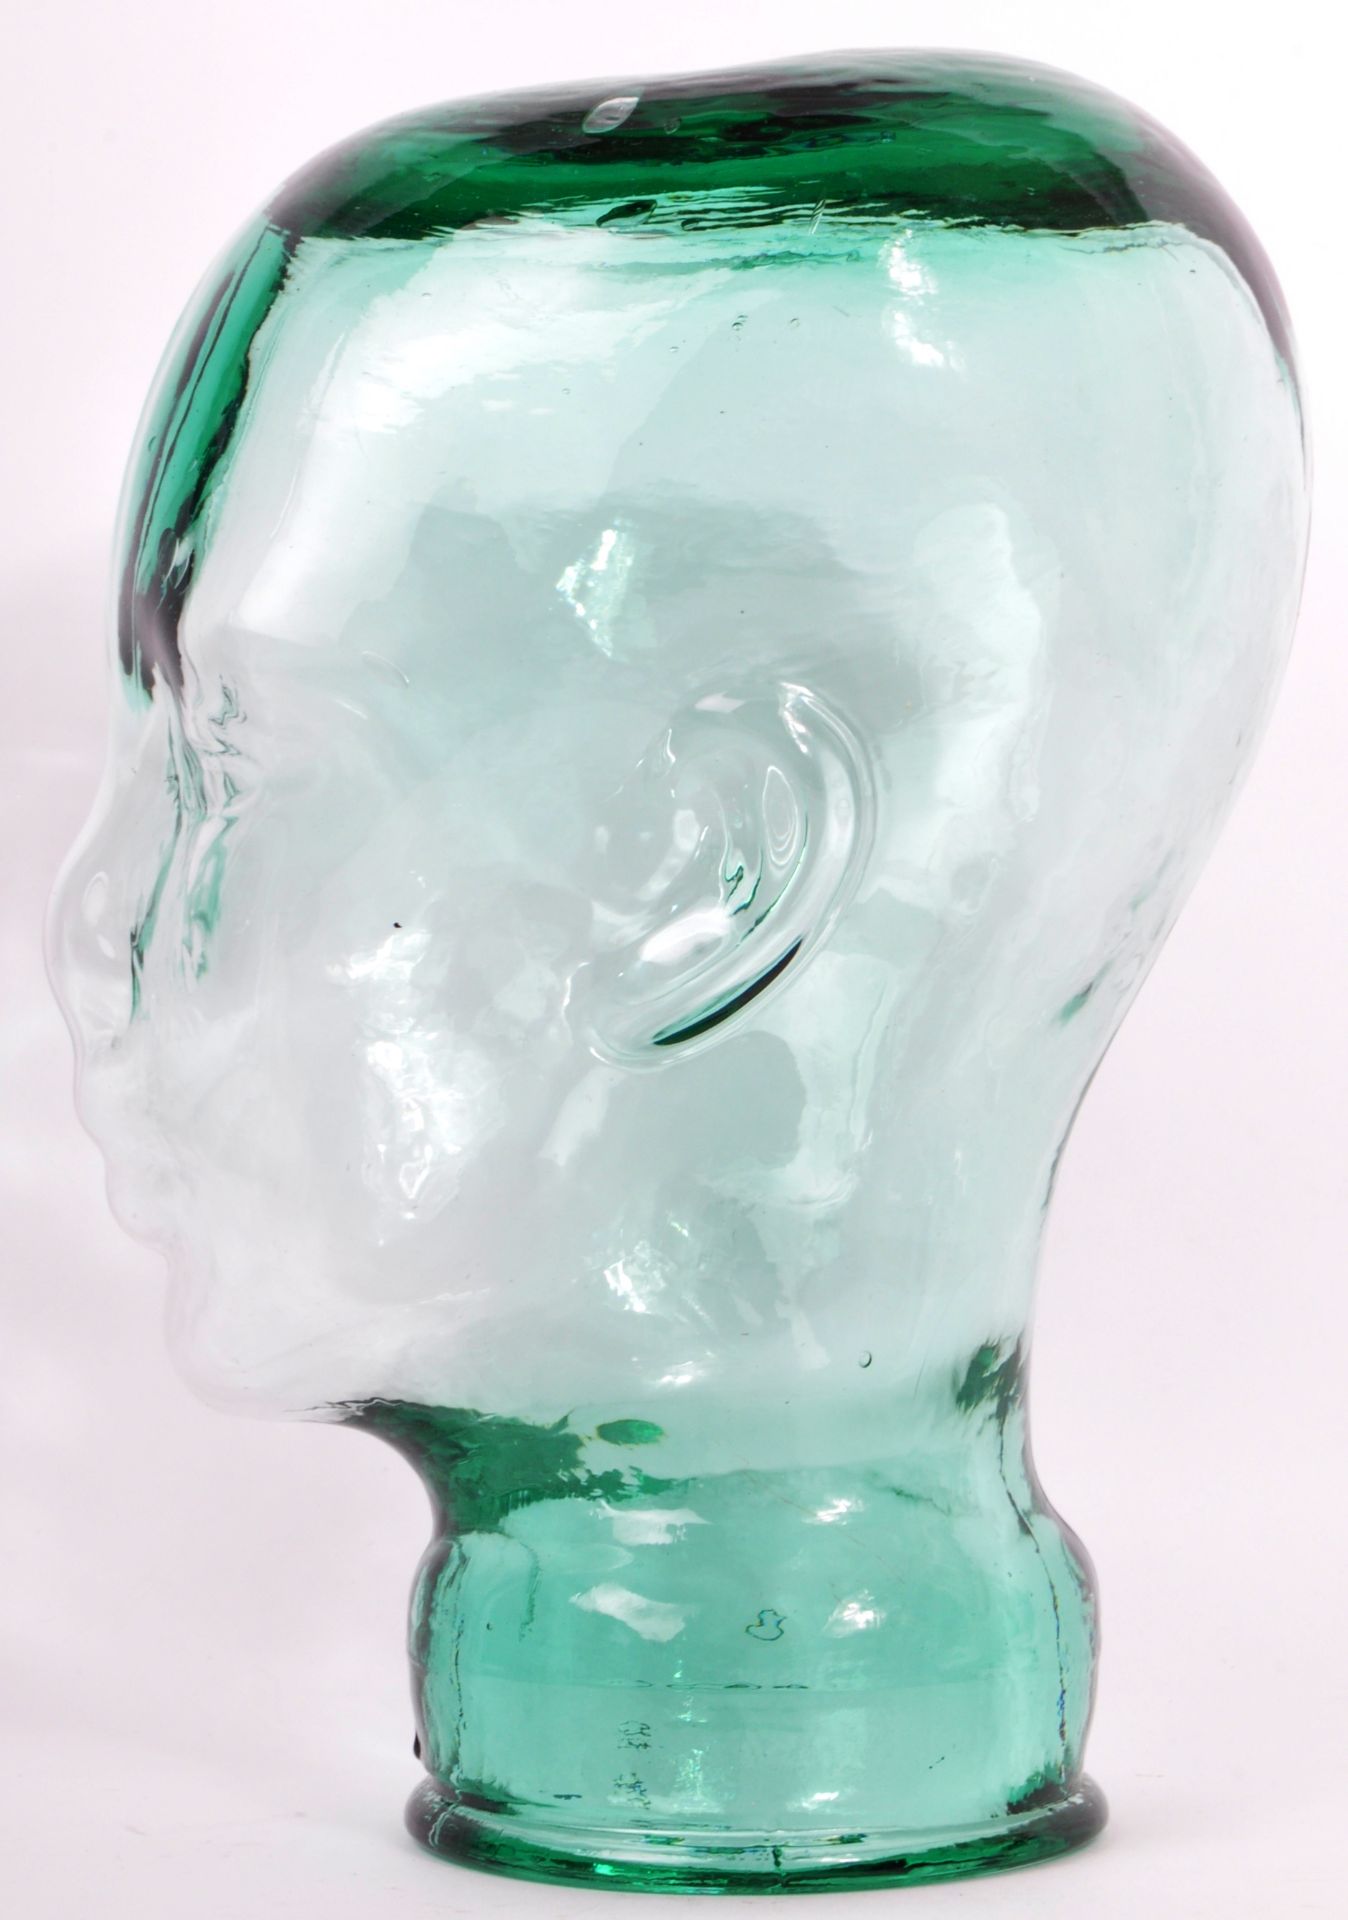 VINATGE 20TH CENTURY CLEAR GLASS MILLINERS MANNEQUIN HEAD - Image 4 of 5